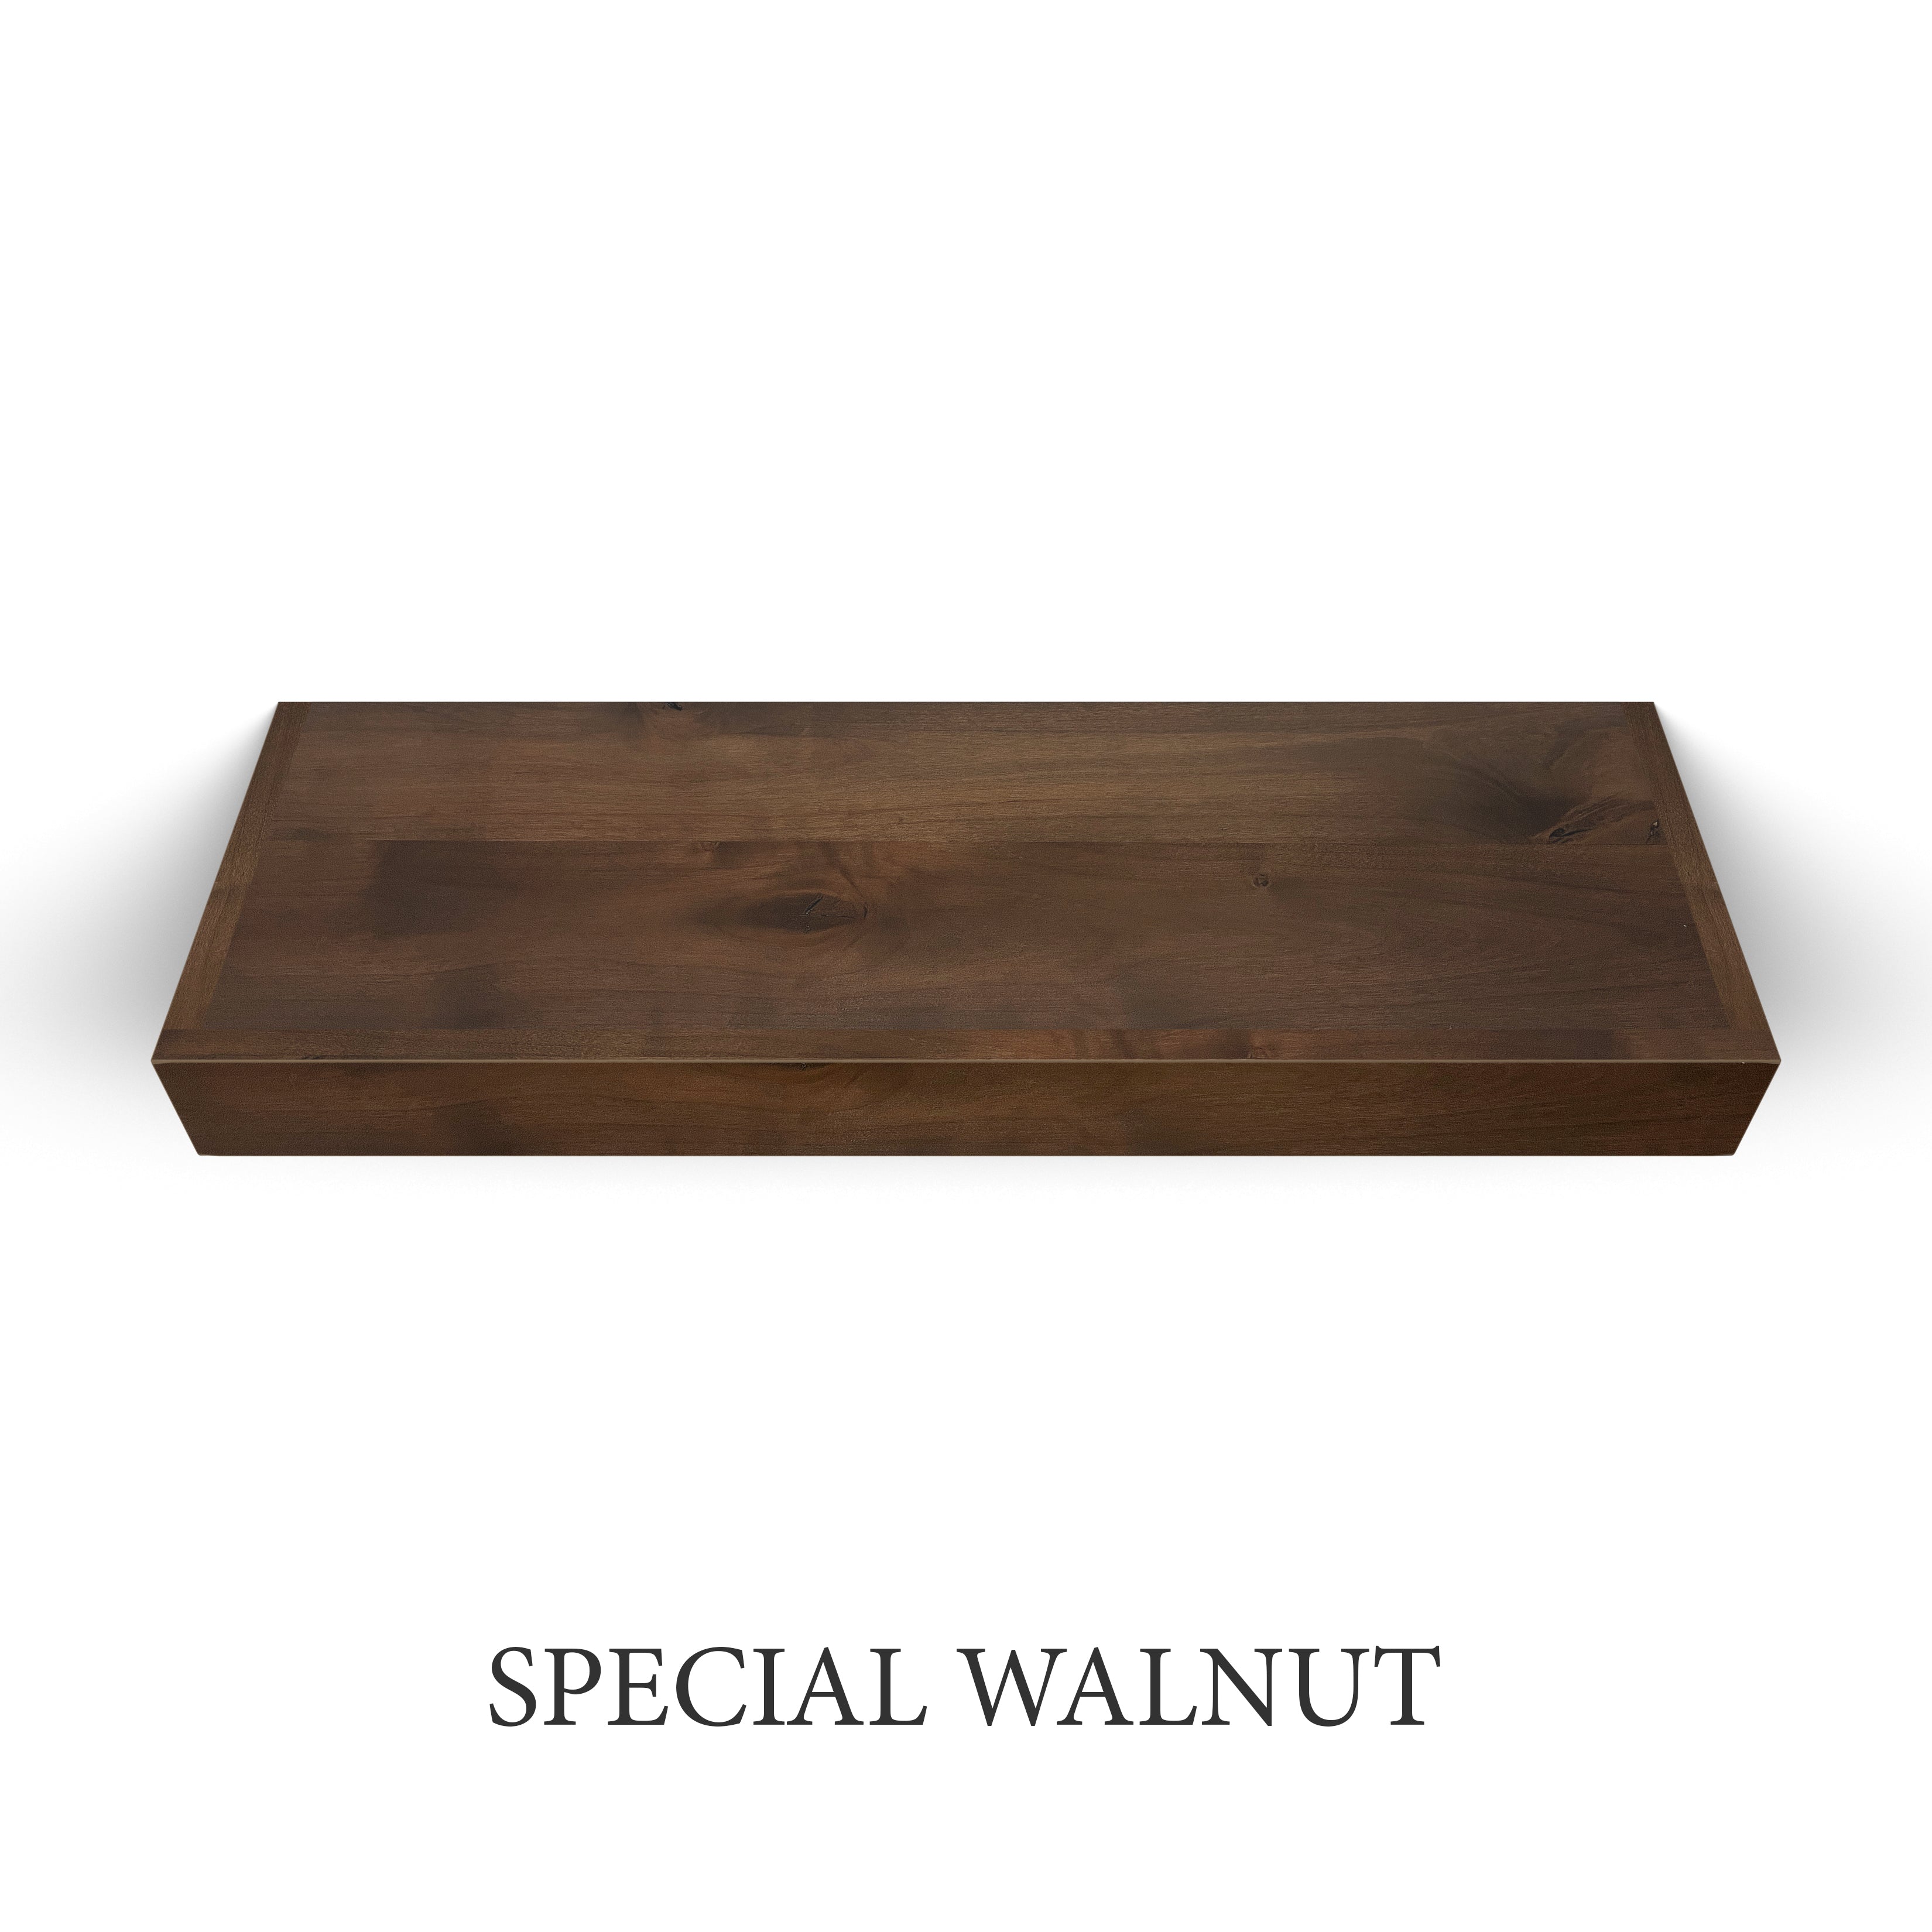 special walnut Rustic Alder 3 Inch Thick LED Lighted Floating Shelf - Battery